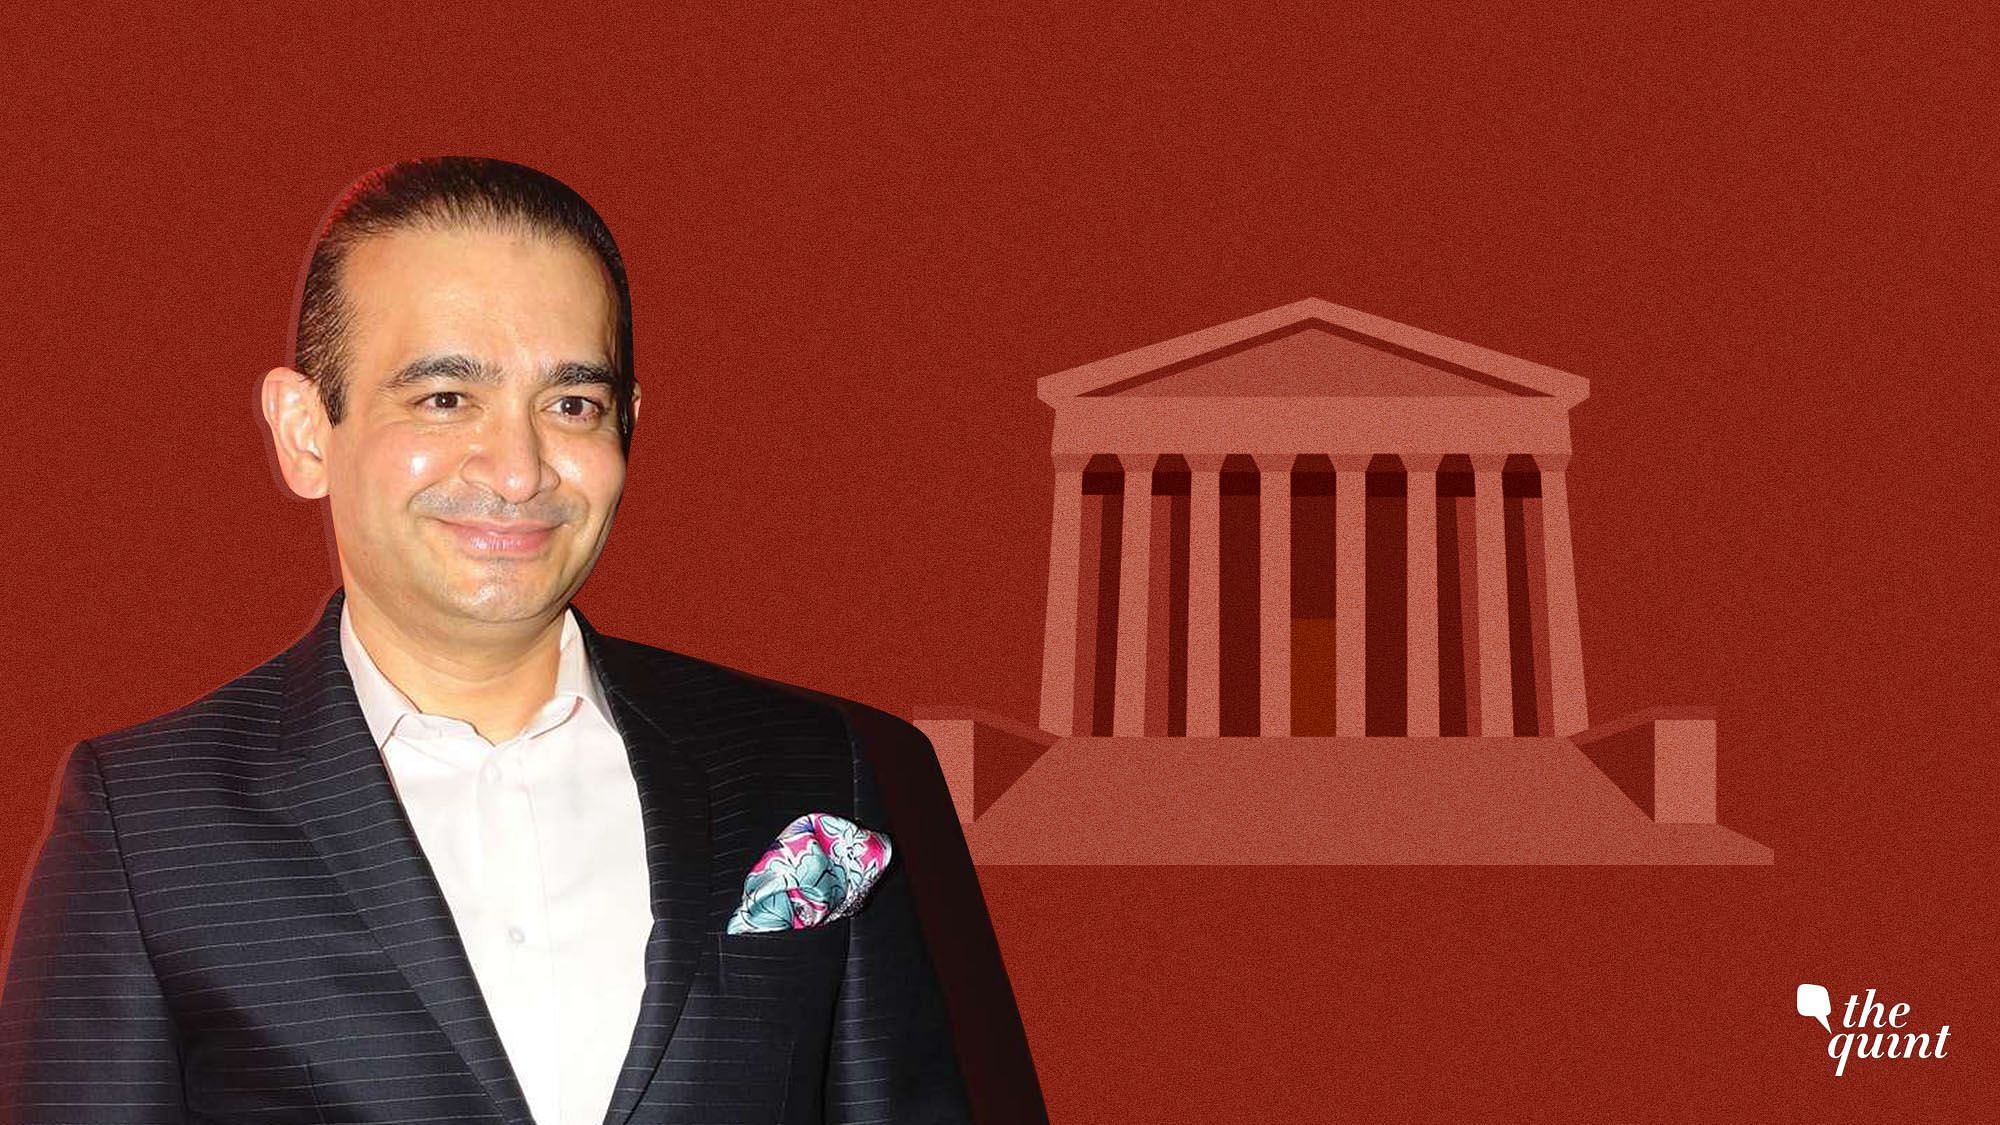 Nirav Modi is accused of defrauding the Punjab National Bank (PNB) of over Rs 13,700 crore.